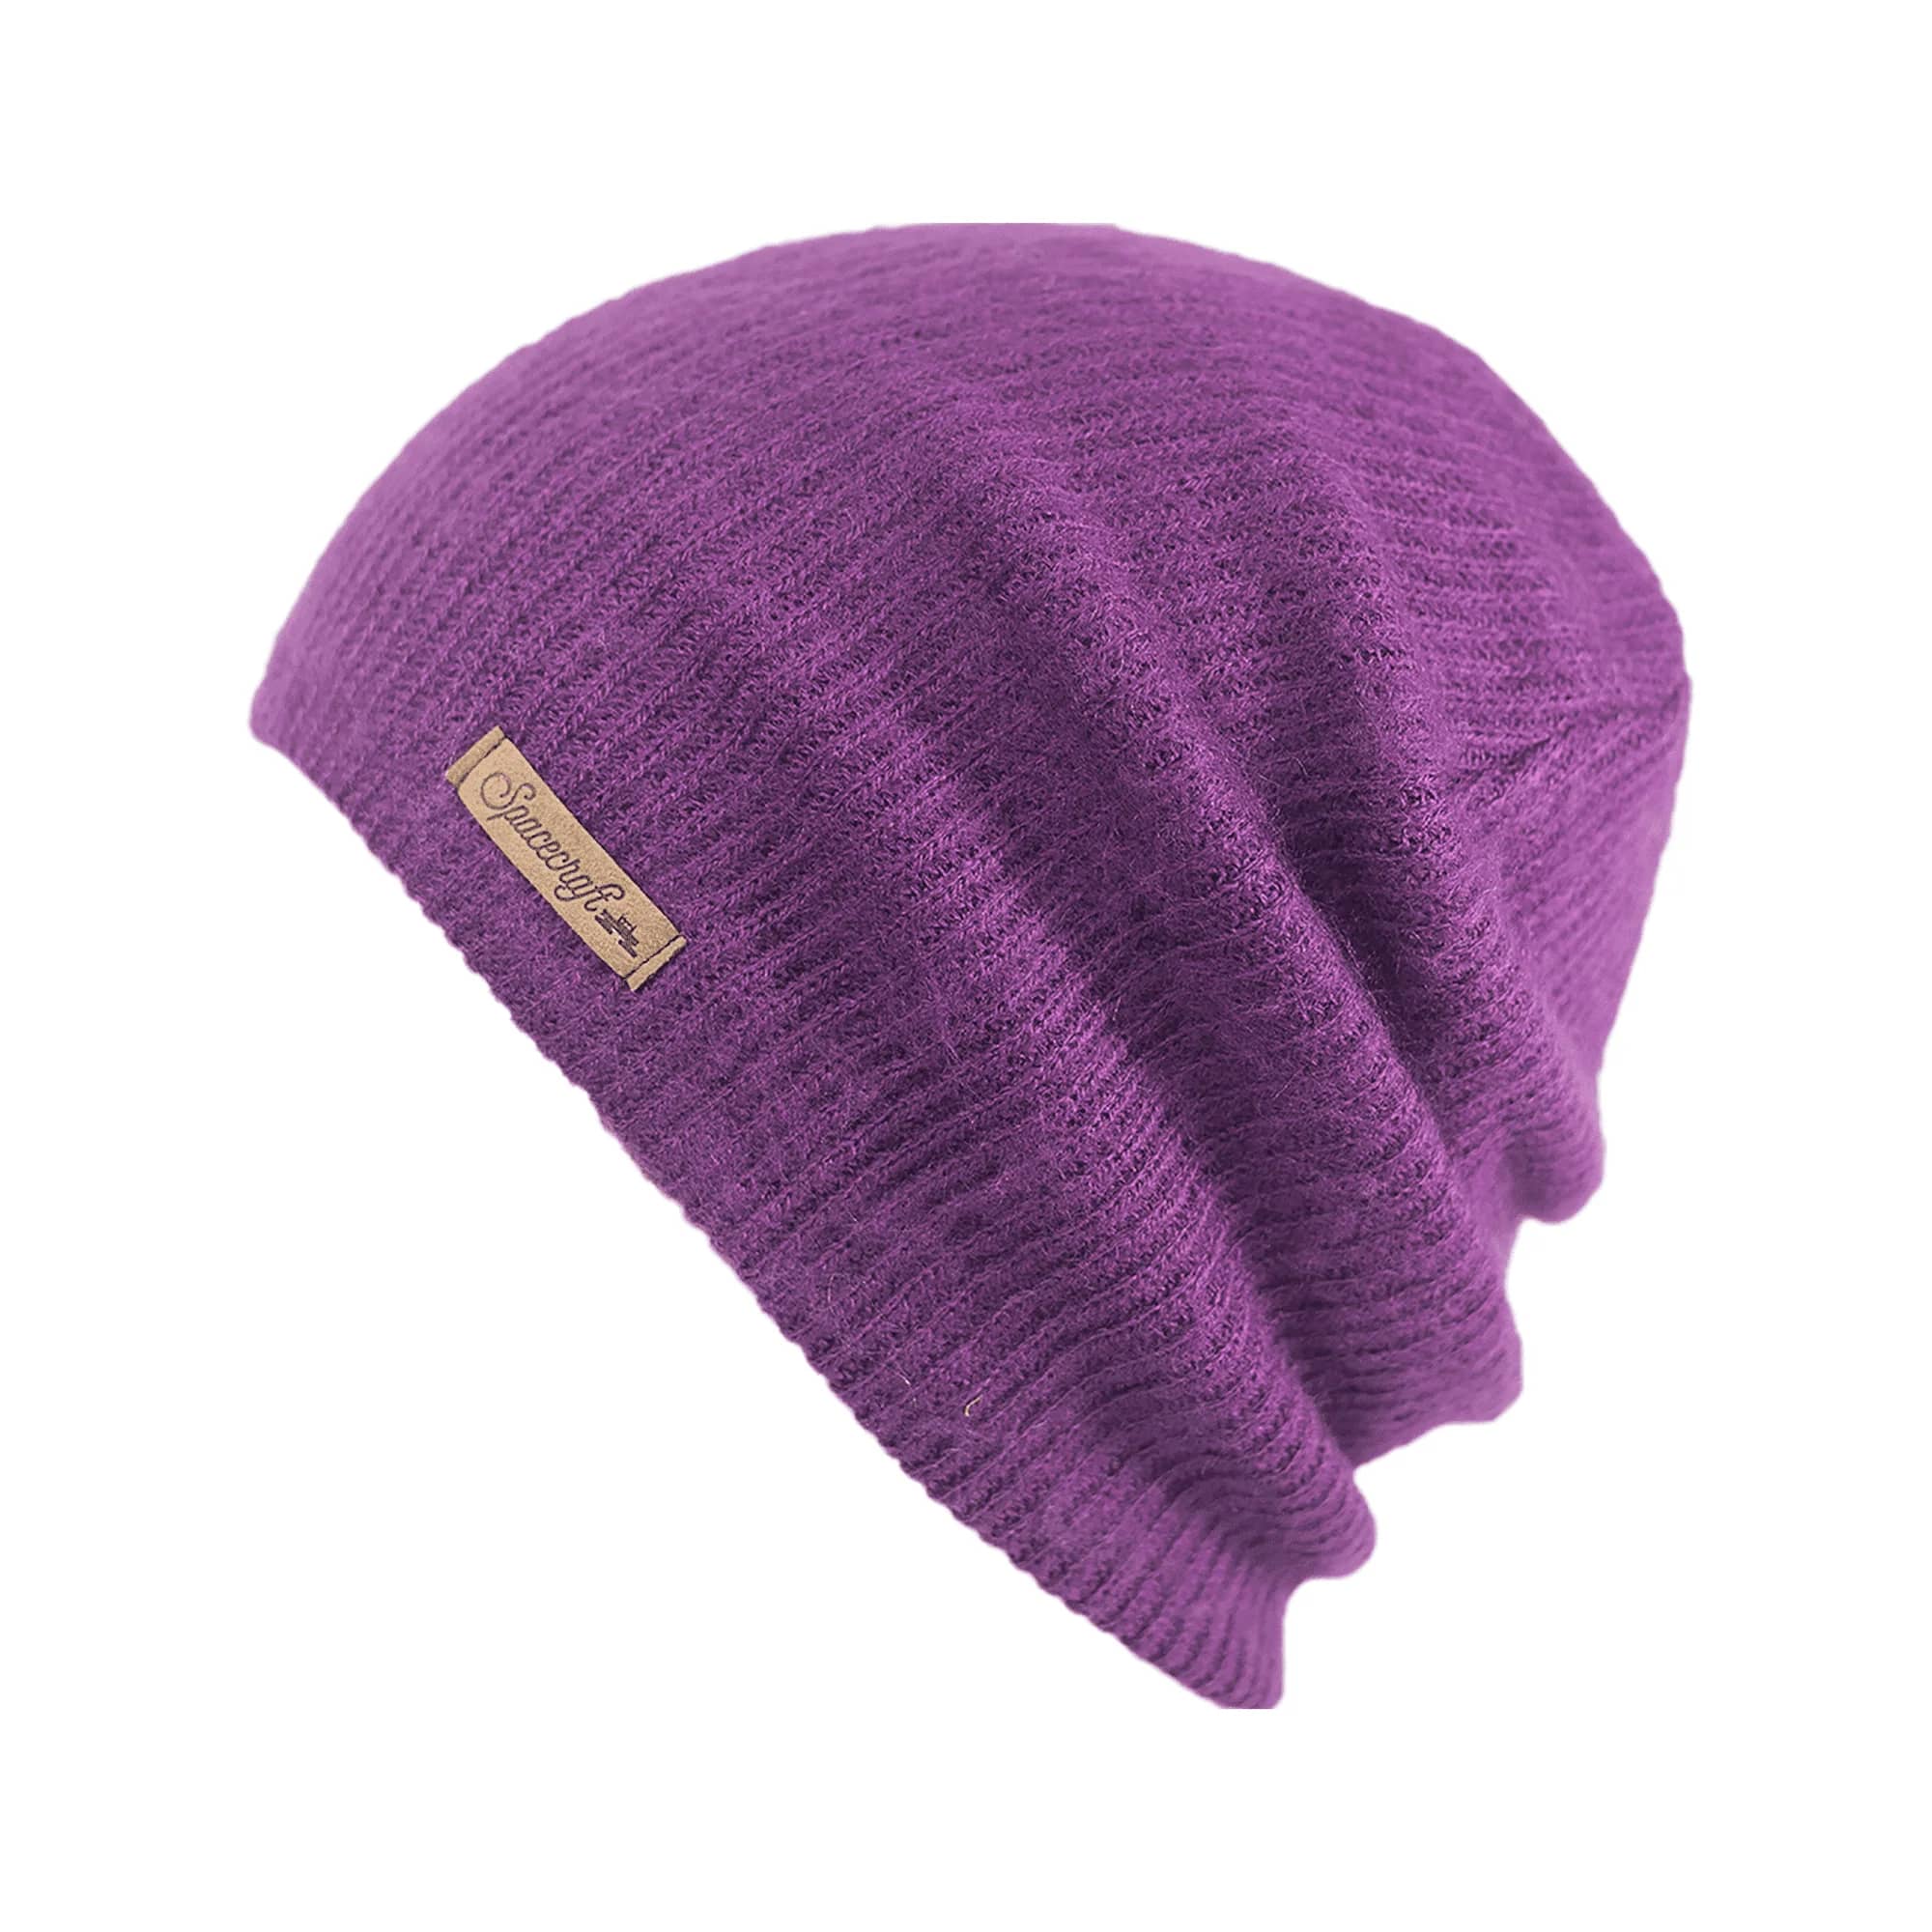 Quinn Beanies by Spacecraft Collective